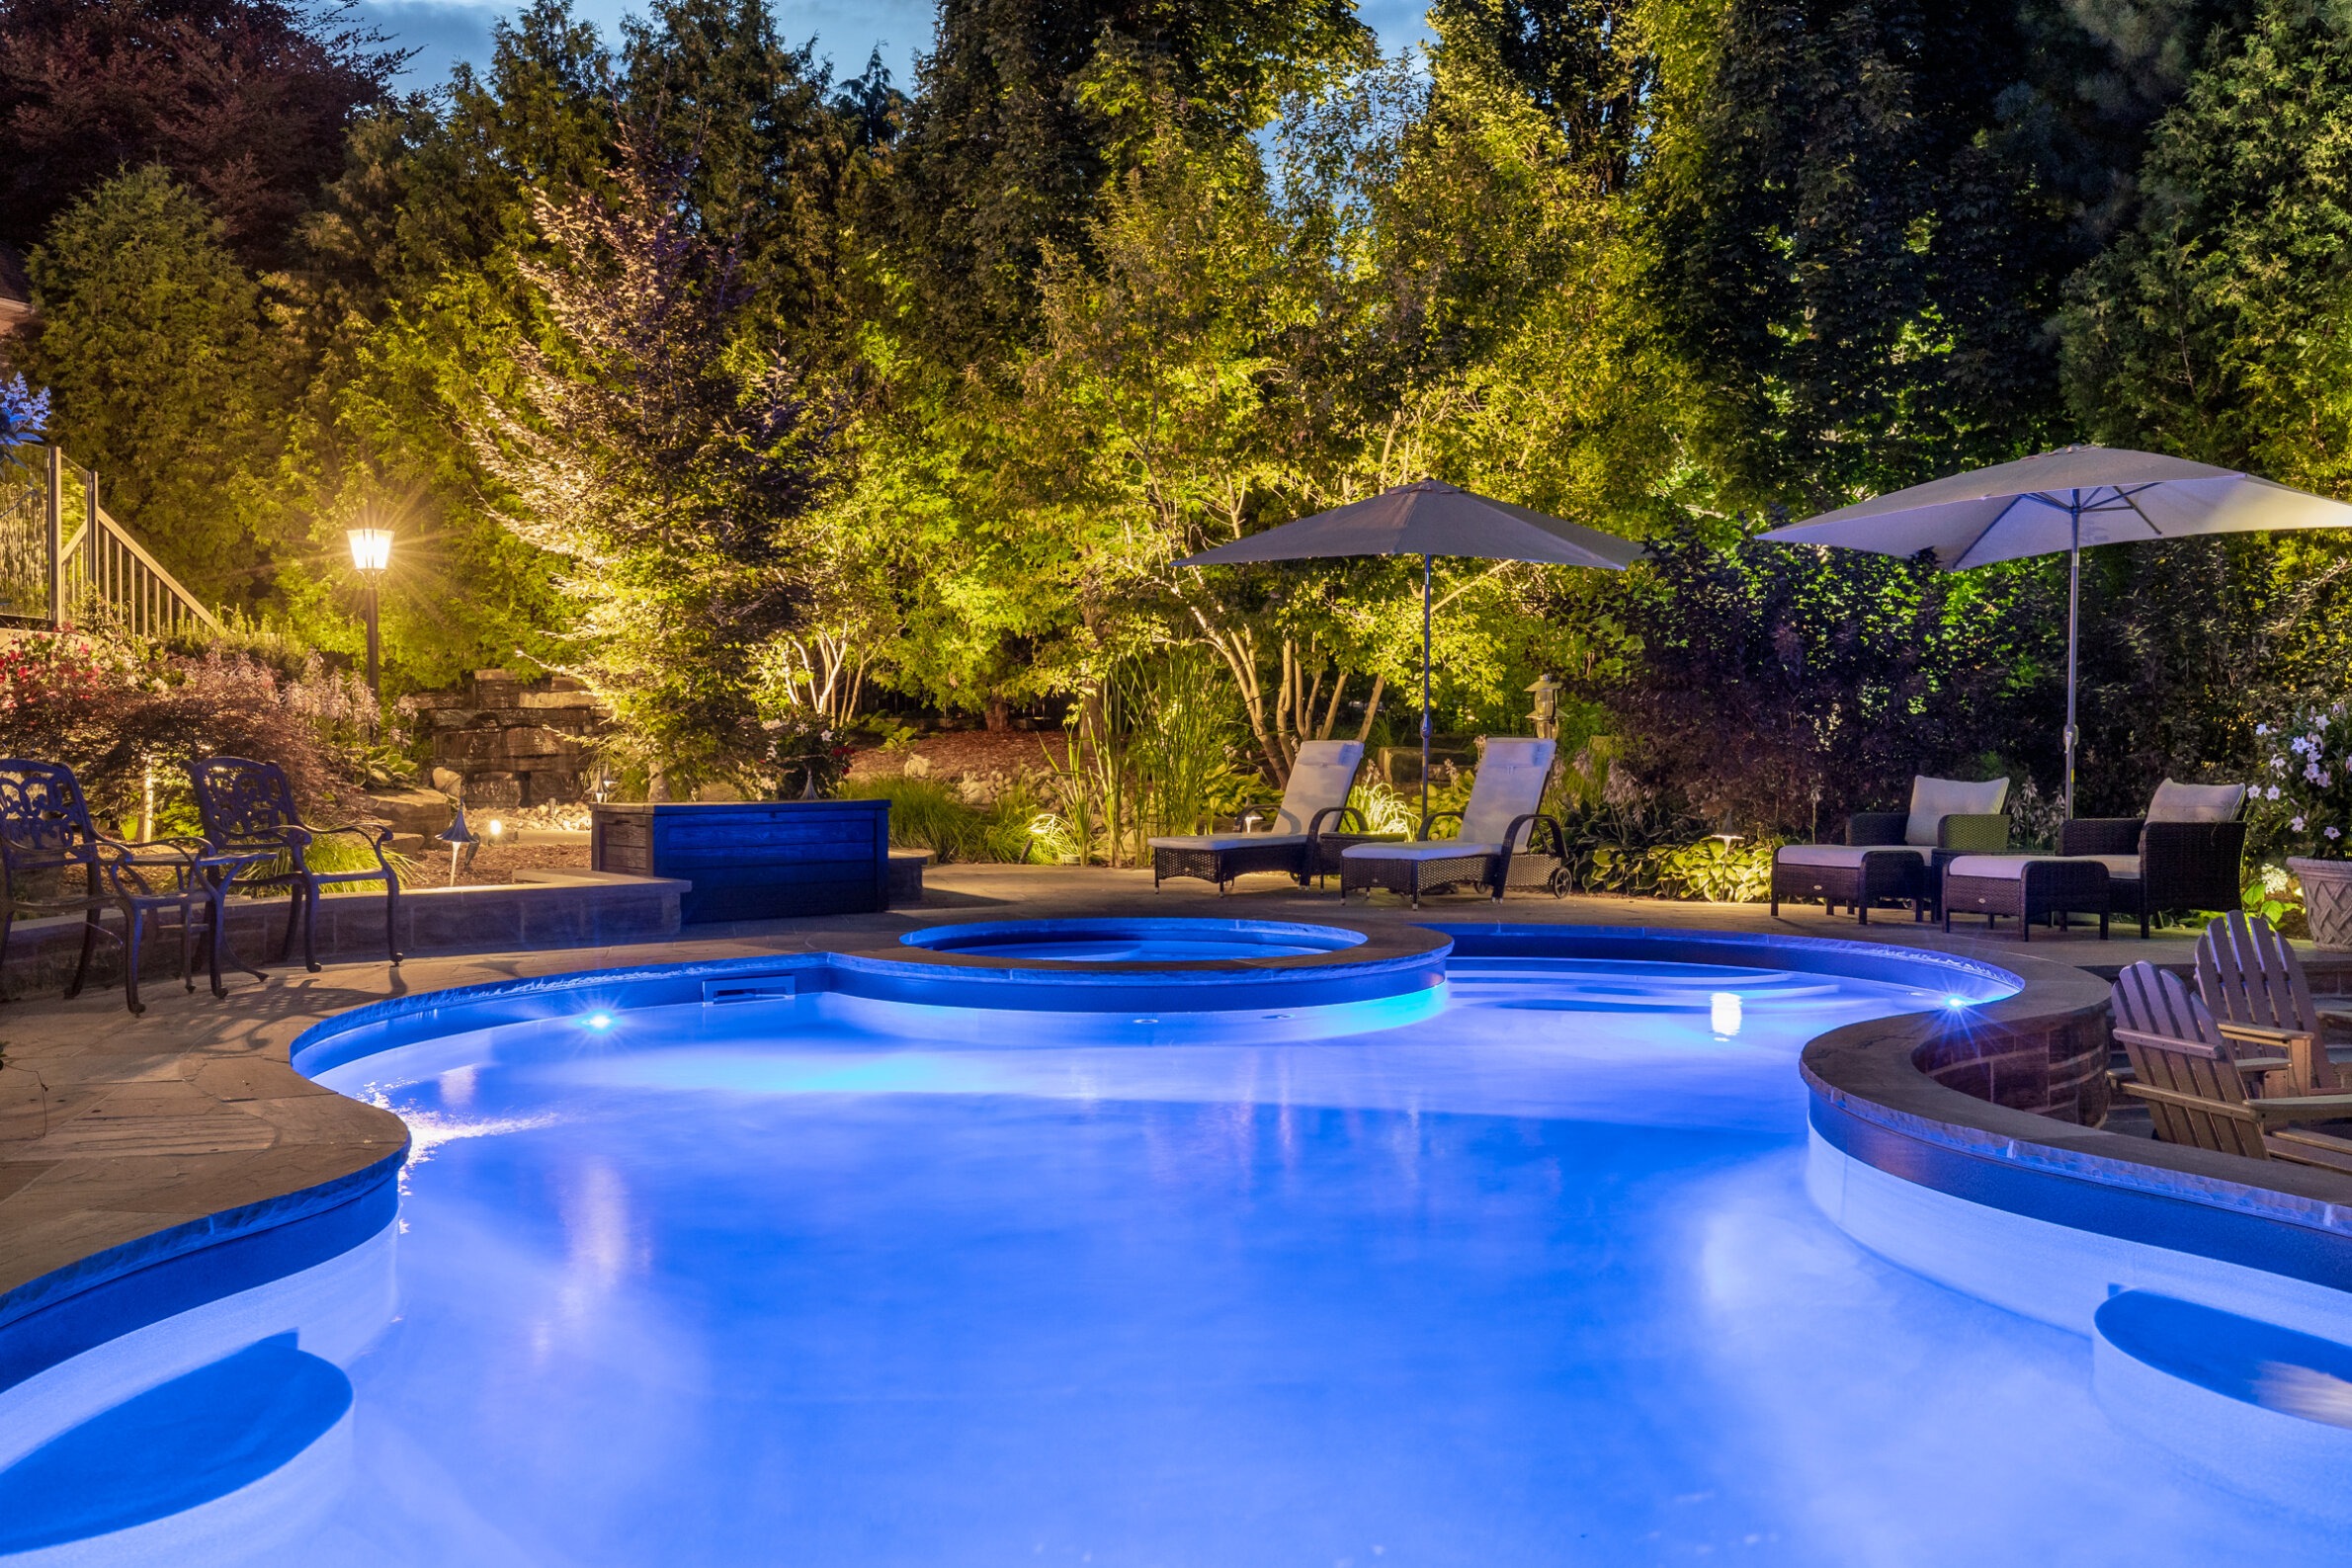 An evening view of a serene backyard with an illuminated swimming pool, hot tub, lounge chairs, patio furniture, and well-landscaped garden with trees.